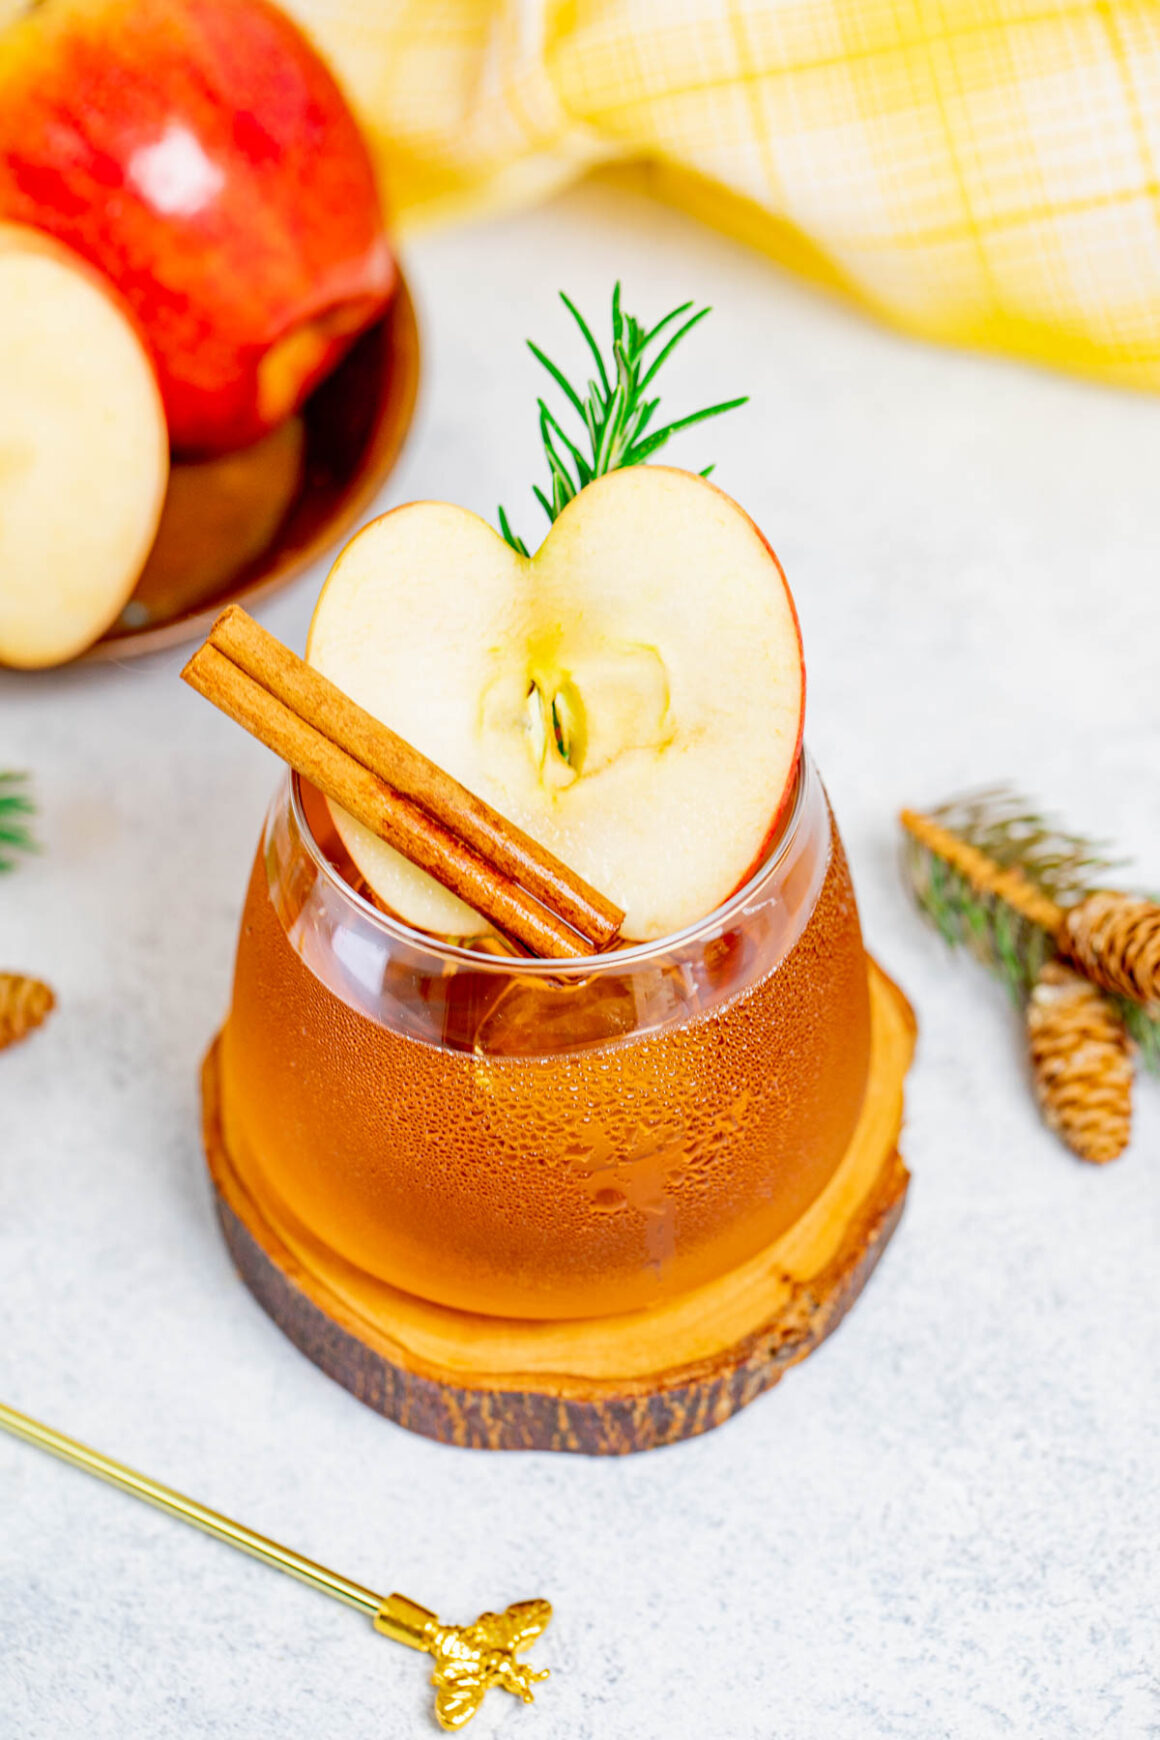 While apple cider offers a natural sweetness, a carefully measured citrus touch brightens the cocktail, creating a harmonious balance of flavors.